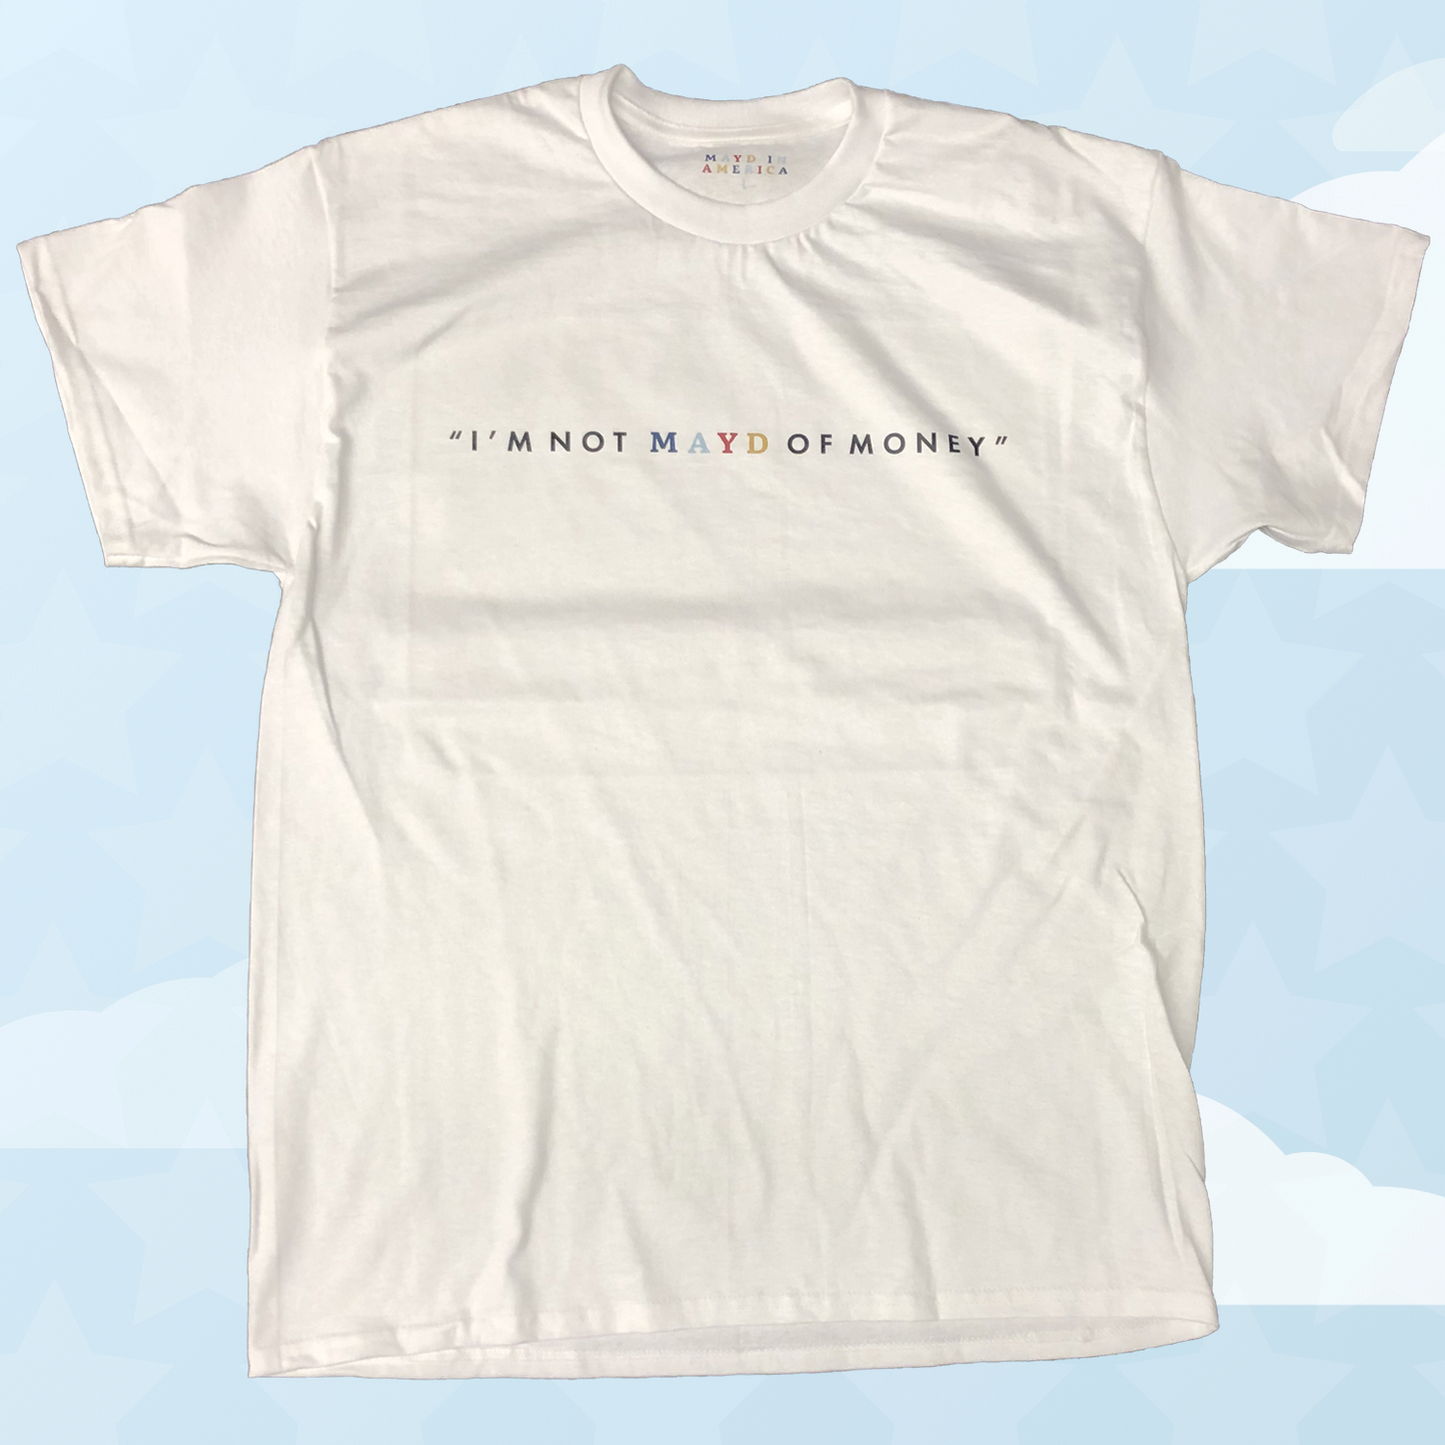 MAYD in America "I'm not MAYD of money" T-shirt